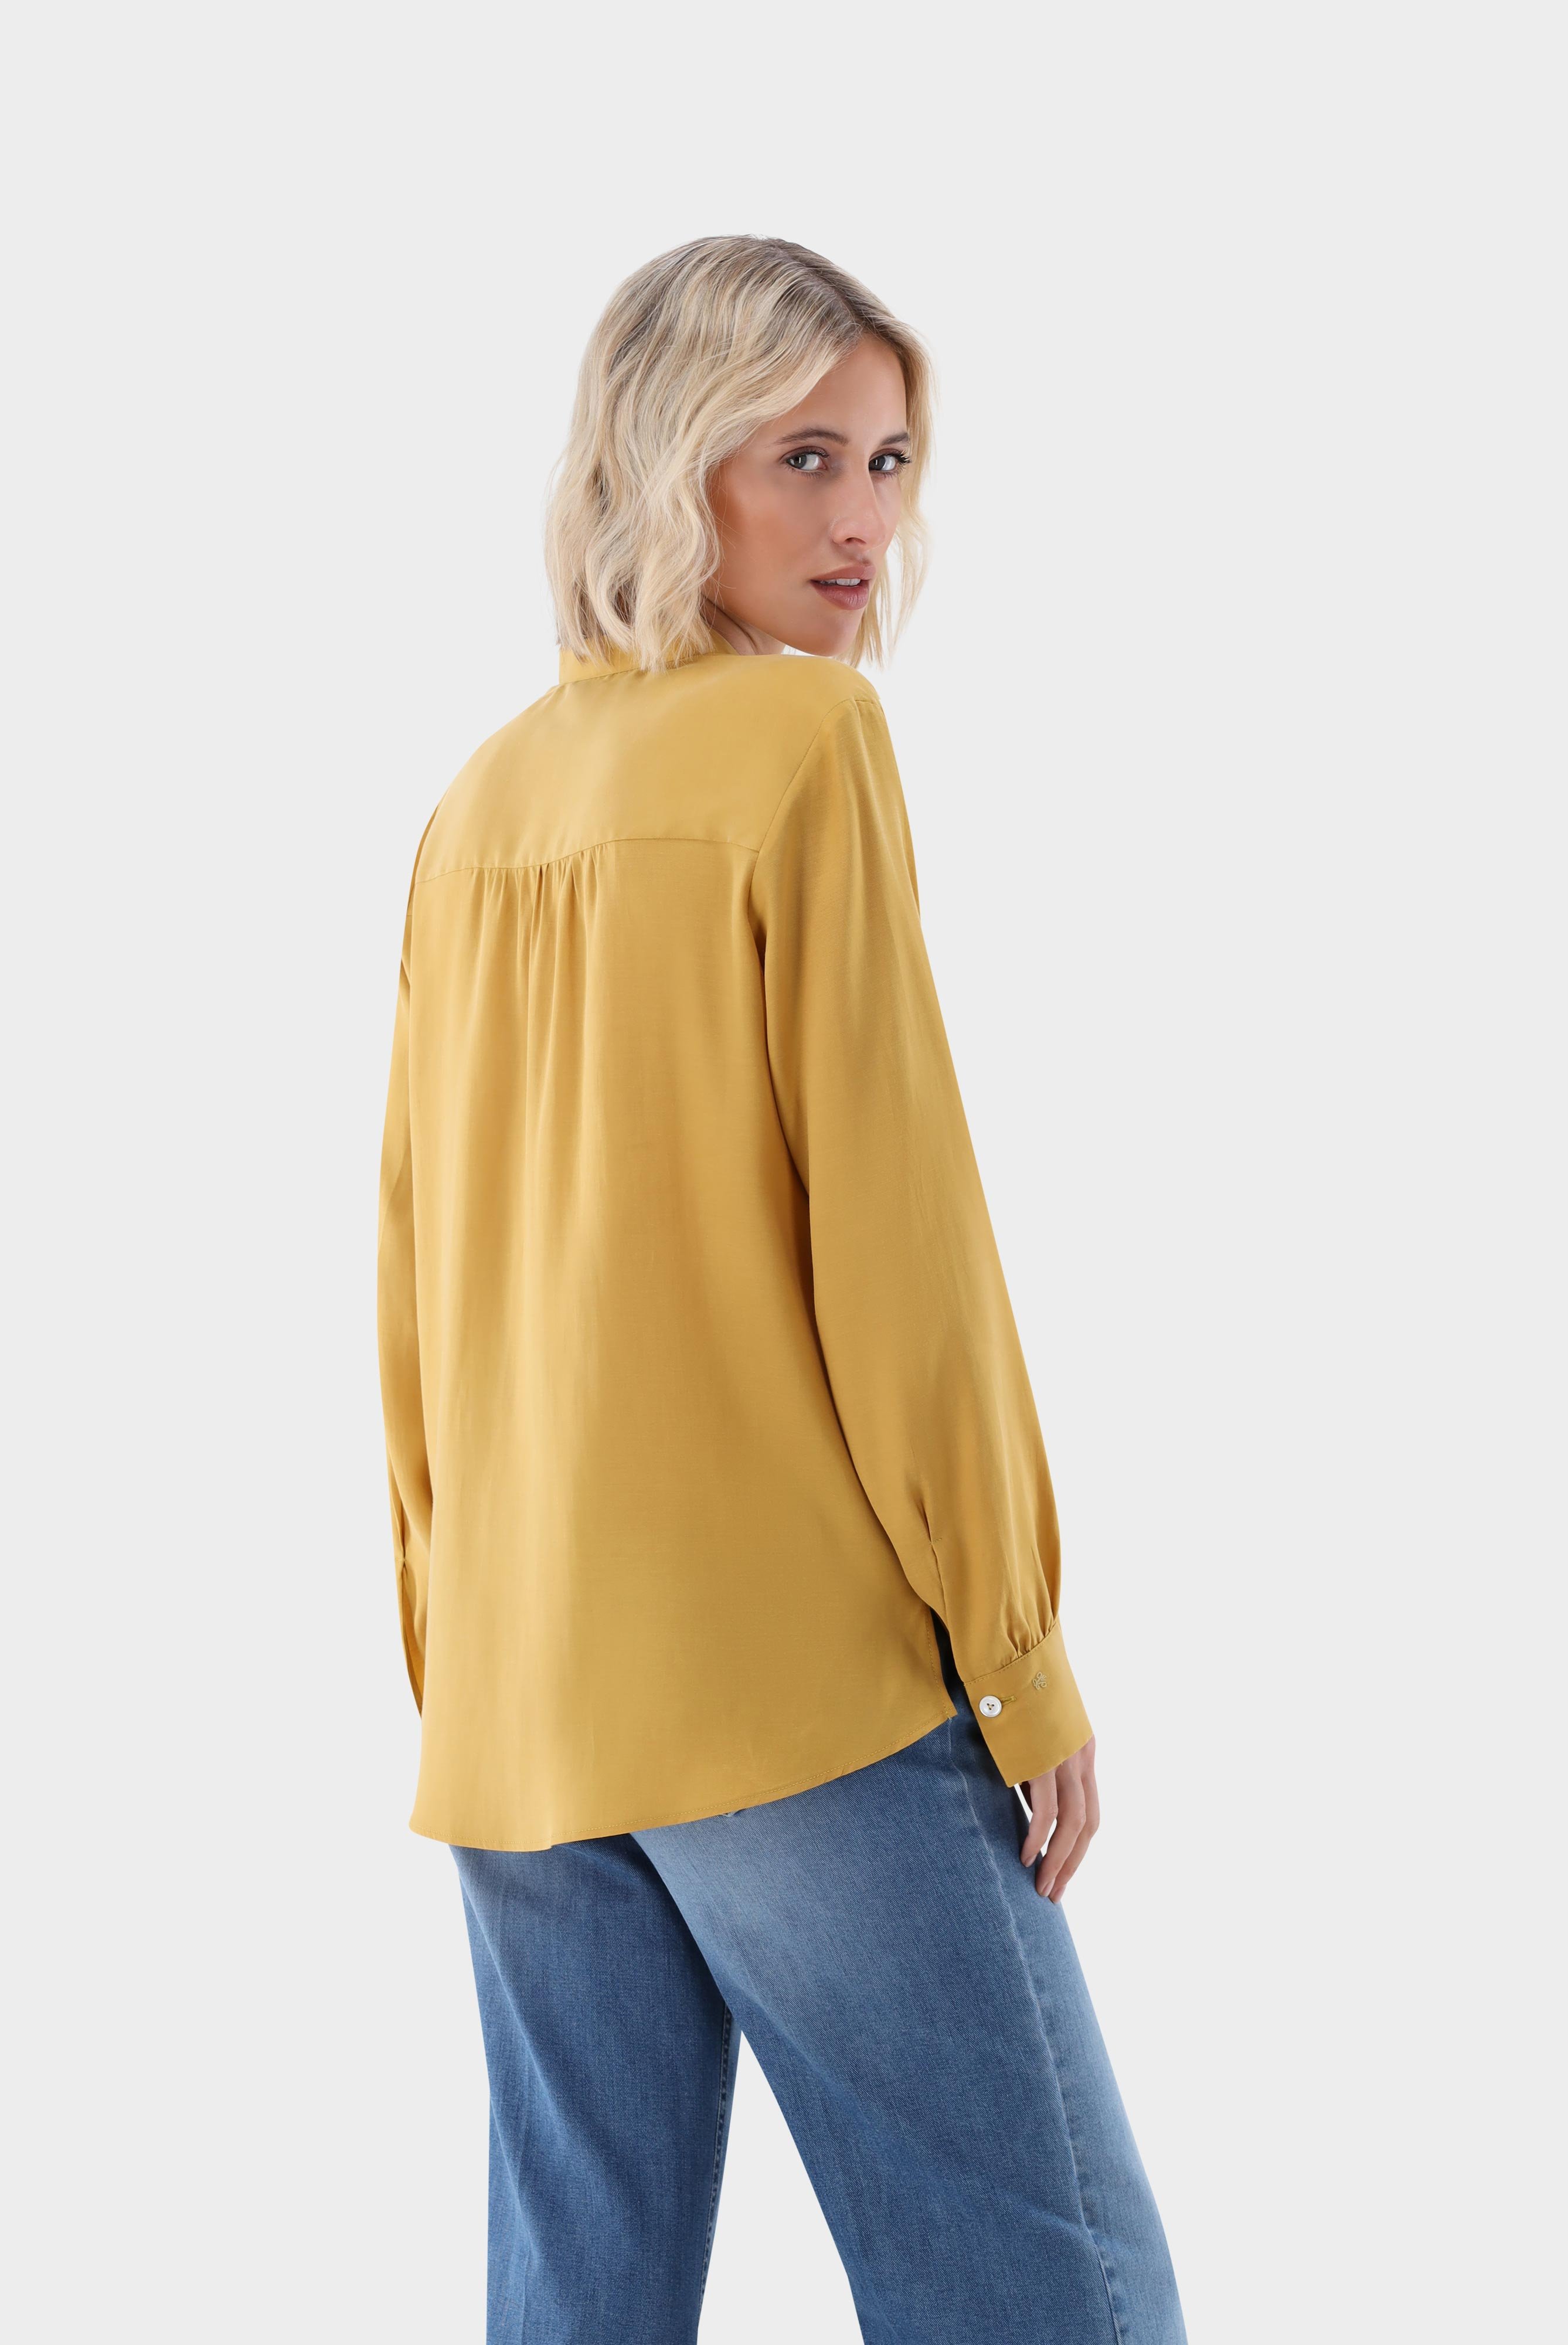 Casual Blouses+Stand-up Collar Shirt with lyocell and cotton+05.527Y.49.150258.270.38